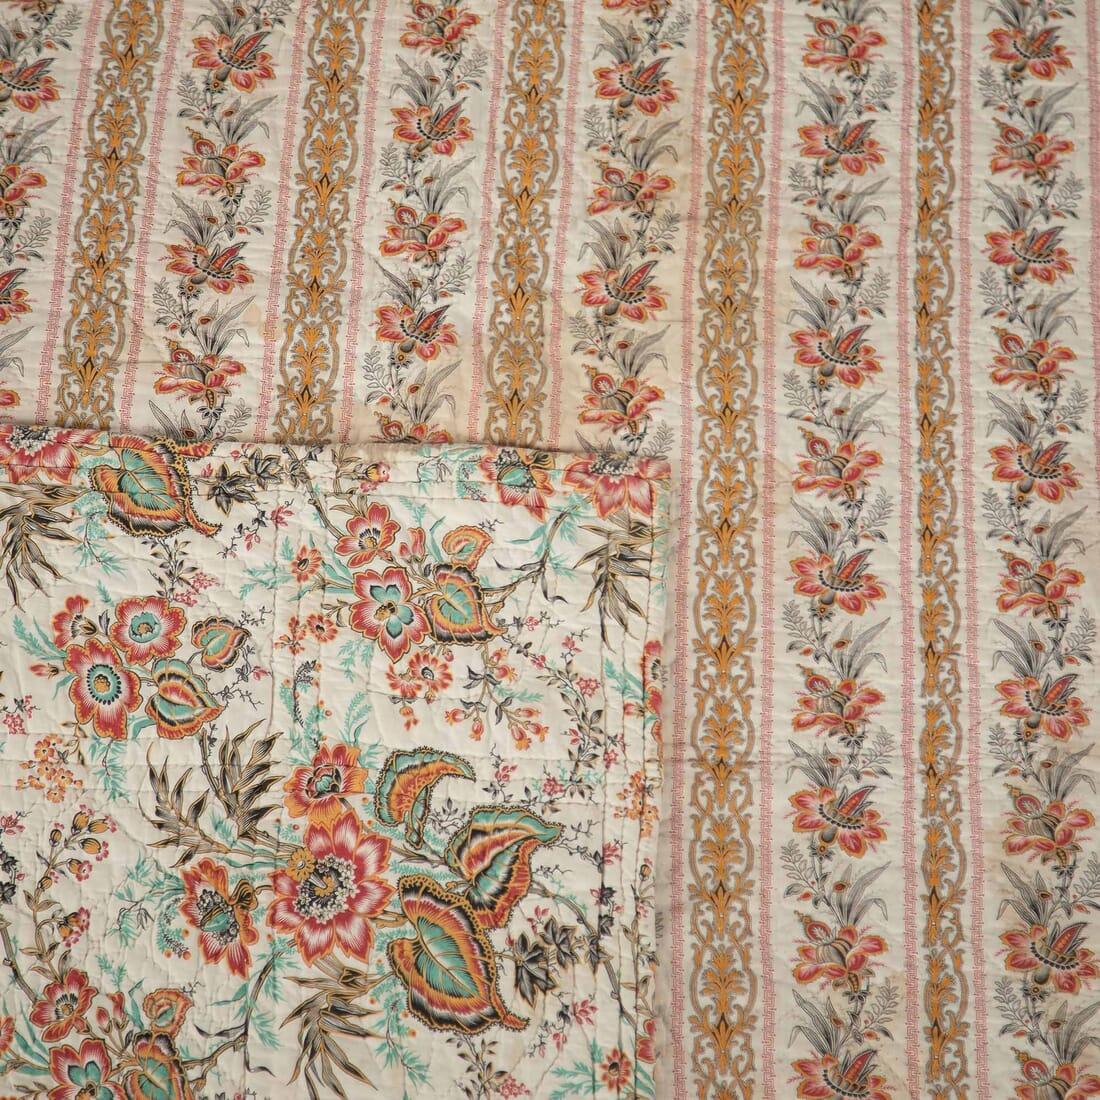 French Provincial Antique French Quilt with Floral Decoration